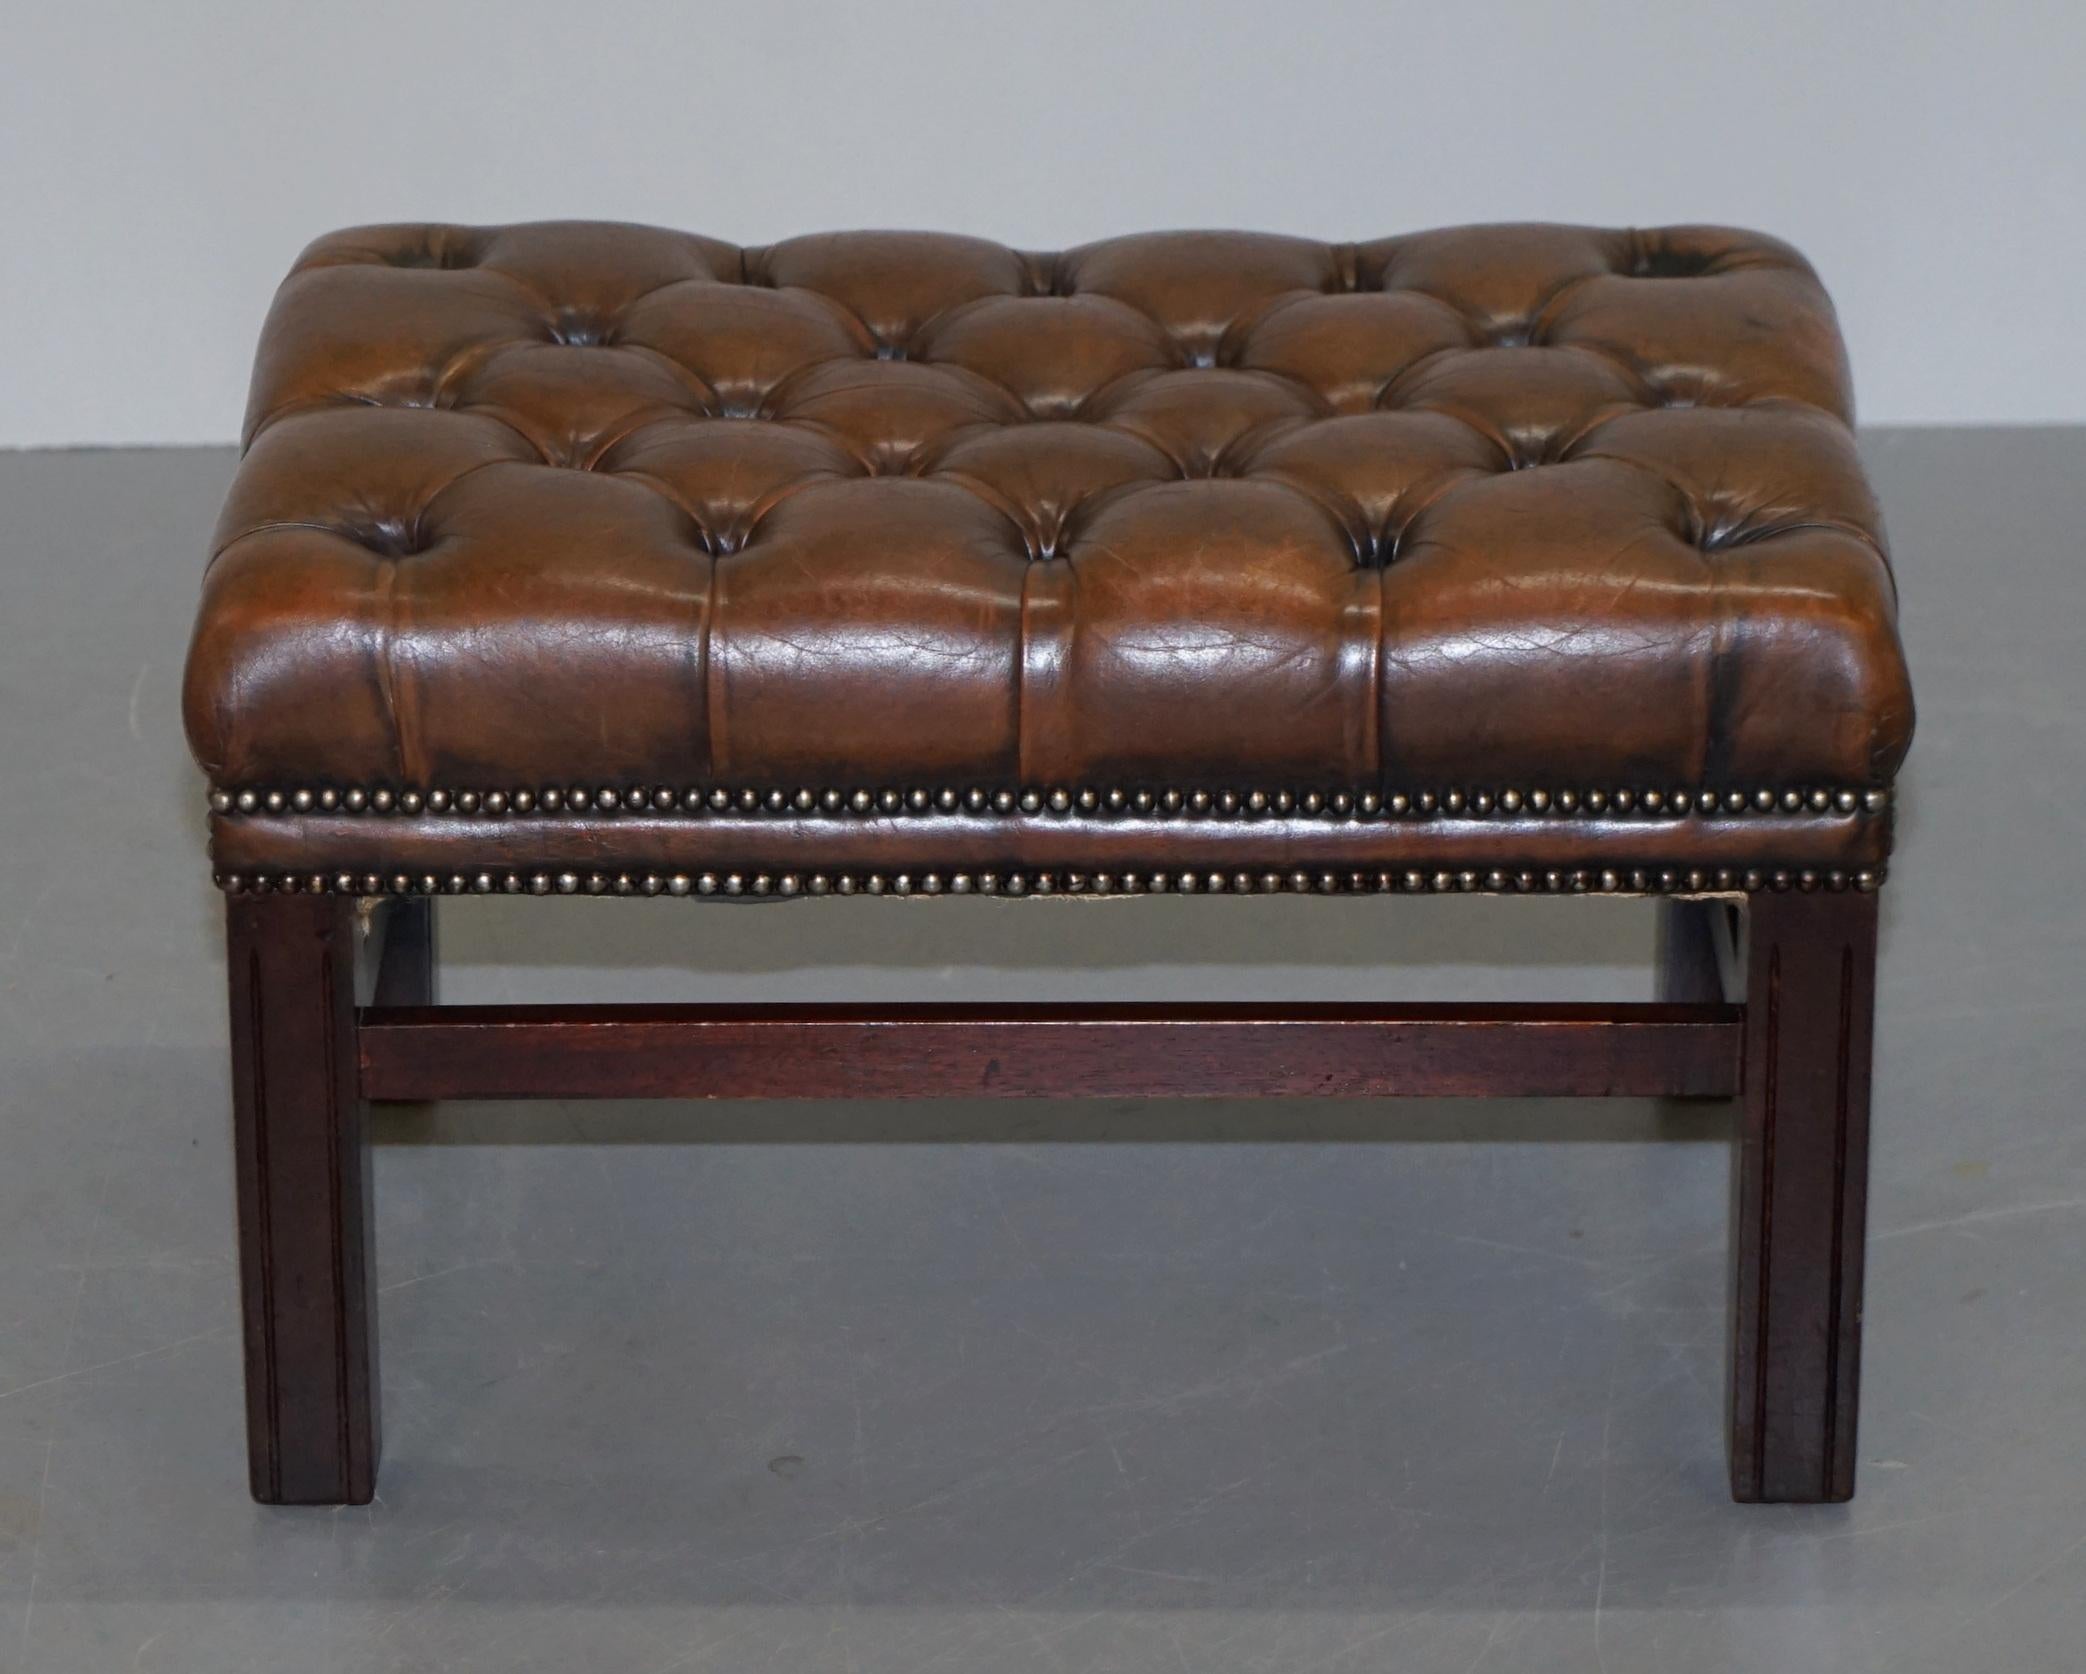 Wimbledon-Furniture

Wimbledon-Furniture is delighted to offer for sale this lovely vintage Chesterfield tufted hand dyed brown leather footstool

A good looking well made and decorative piece, the stool is tufted and buttoned all over, the legs